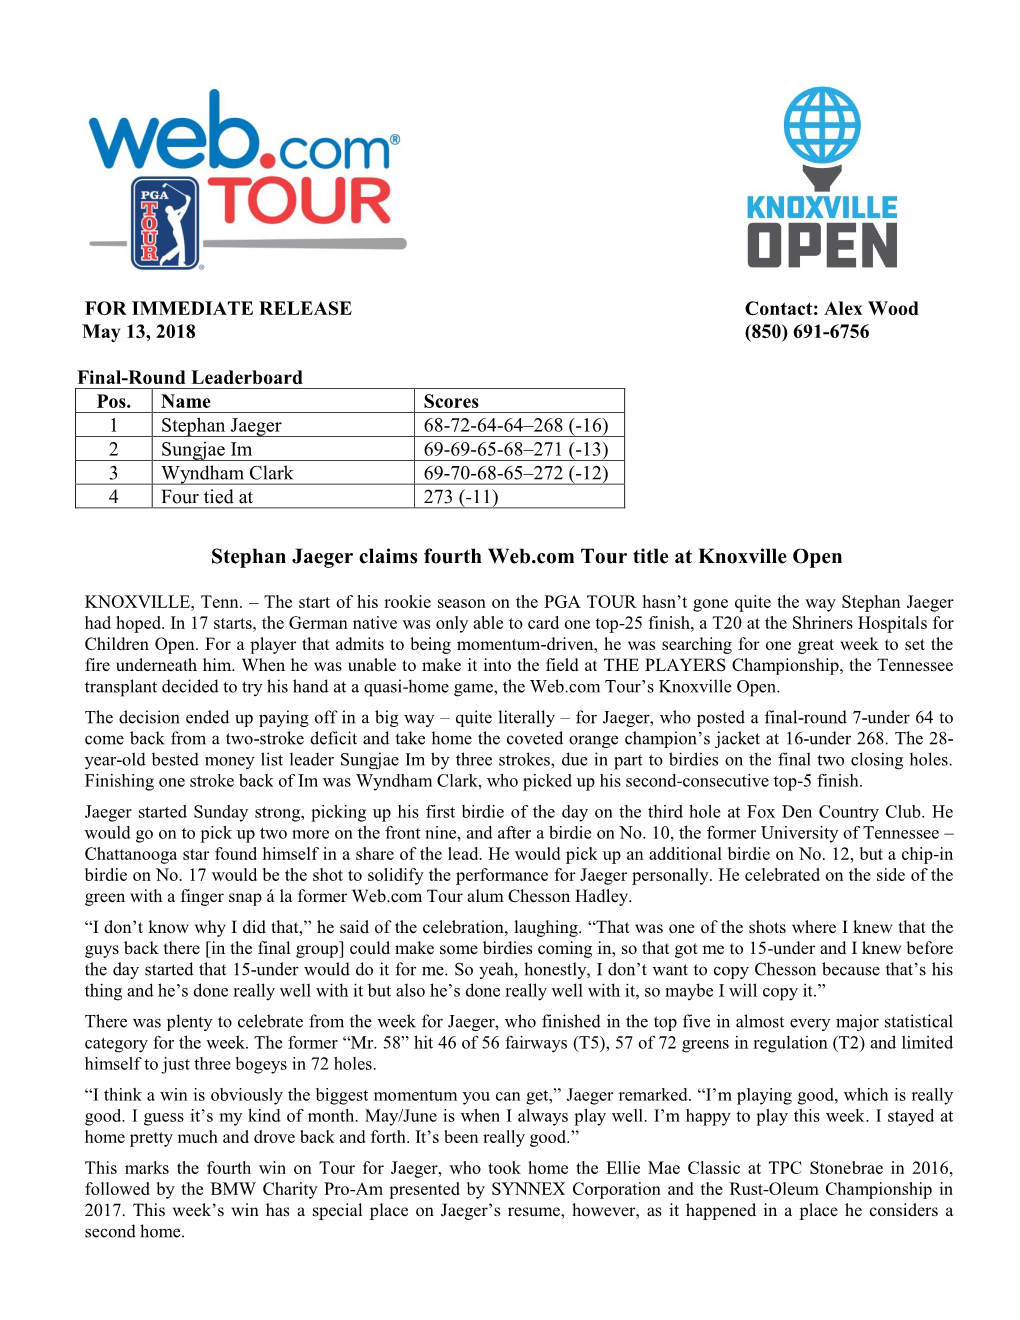 Stephan Jaeger Claims Fourth Web.Com Tour Title at Knoxville Open